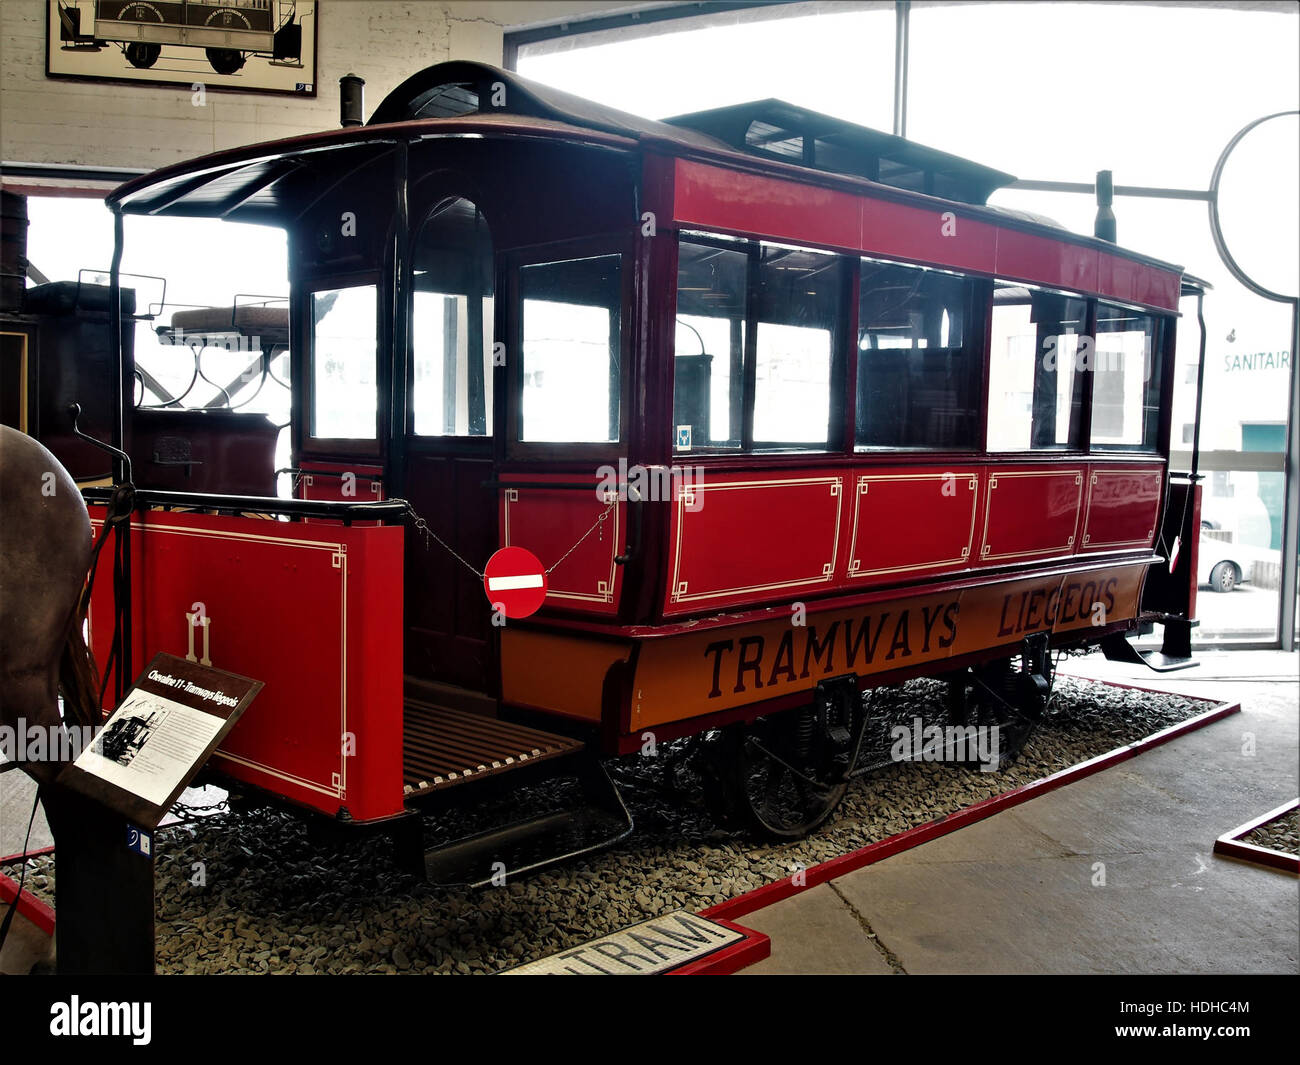 1875 Chevaline 11 SOCIETE ANONYME DES TRAMWAYS LIEGEOIS (T.L.) pic2 Stock Photo